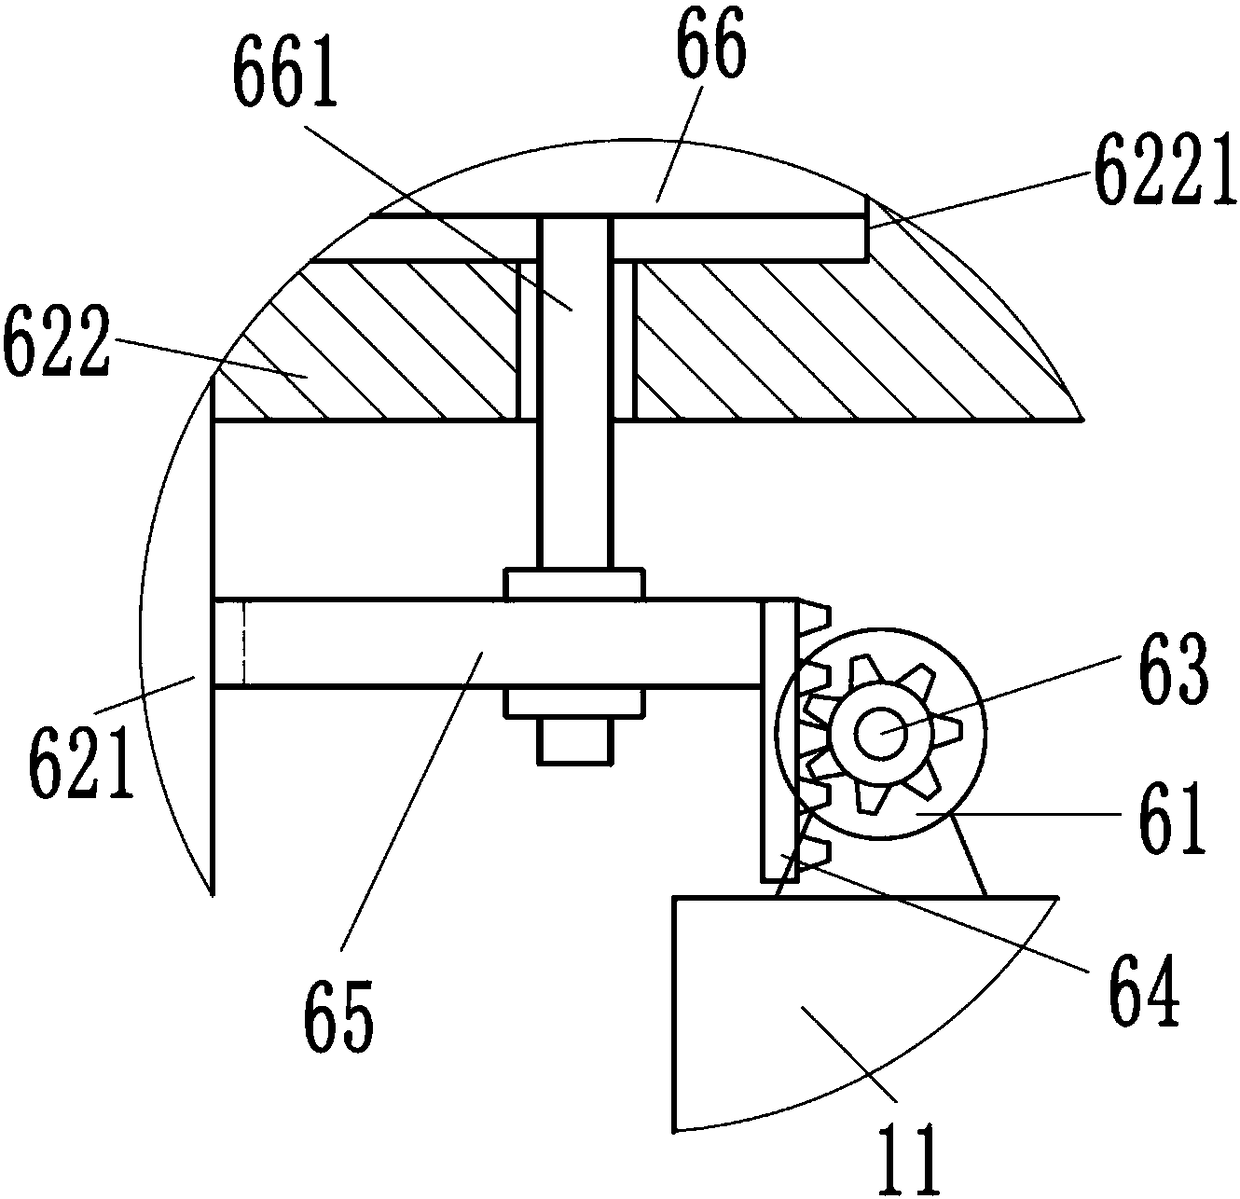 Engineering cement mixing device